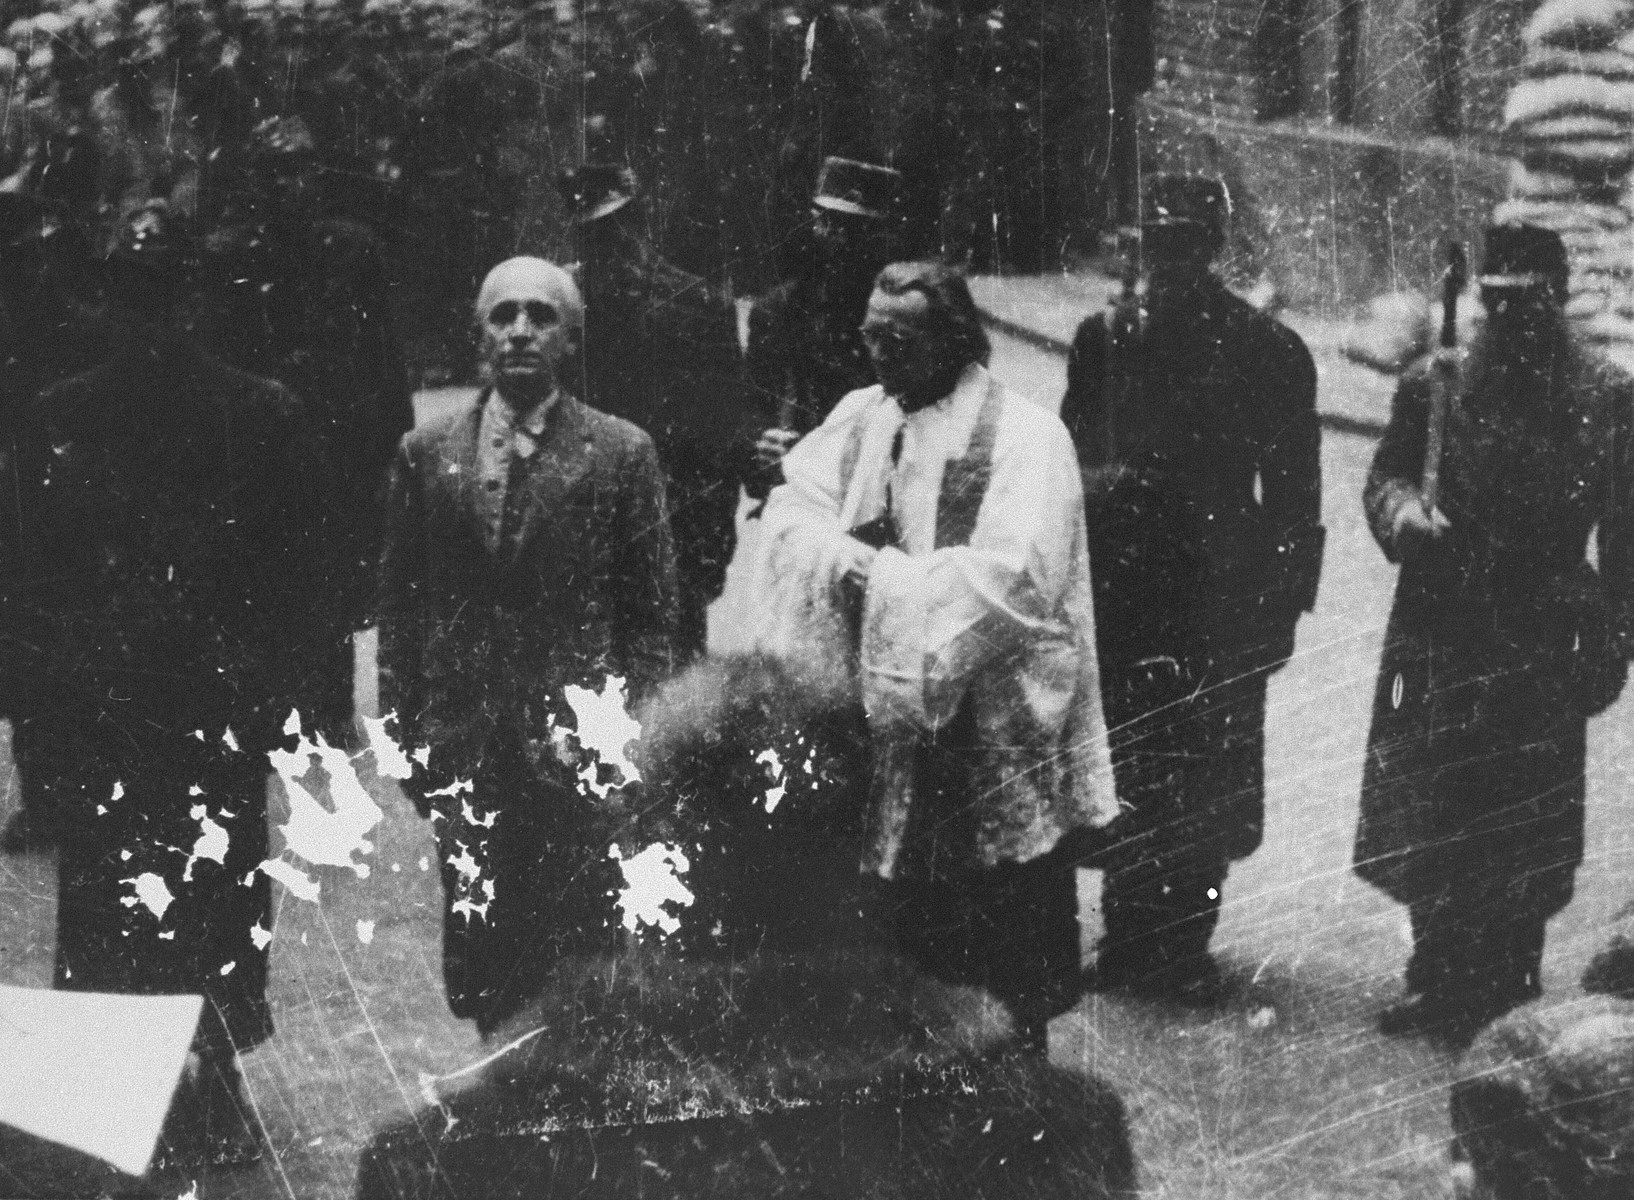 A Hungarian official reads the death sentence of former Prime Minister Dr.  Laszlo V.  Bardossy prior to his execution in the courtyard of the Academy of Music in Budapest.

The trial of Laszlo V. Bardossy was the first postwar trial of a suspected Hungarian war criminal to be carried out by the People's Tribunal in the Academy of Music in Budapest.  Bardossy was charged as former prime minister with illegally involving Hungary in war against the Soviet Union and with responsibility for allowing the massacre of Jews at Kamenets-Podolsk in July 1941.  Bardossy's trial was convened on October 29, 1945 and he was convicted on November 3, 1945.  His execution was carried out on January 10, 1946.